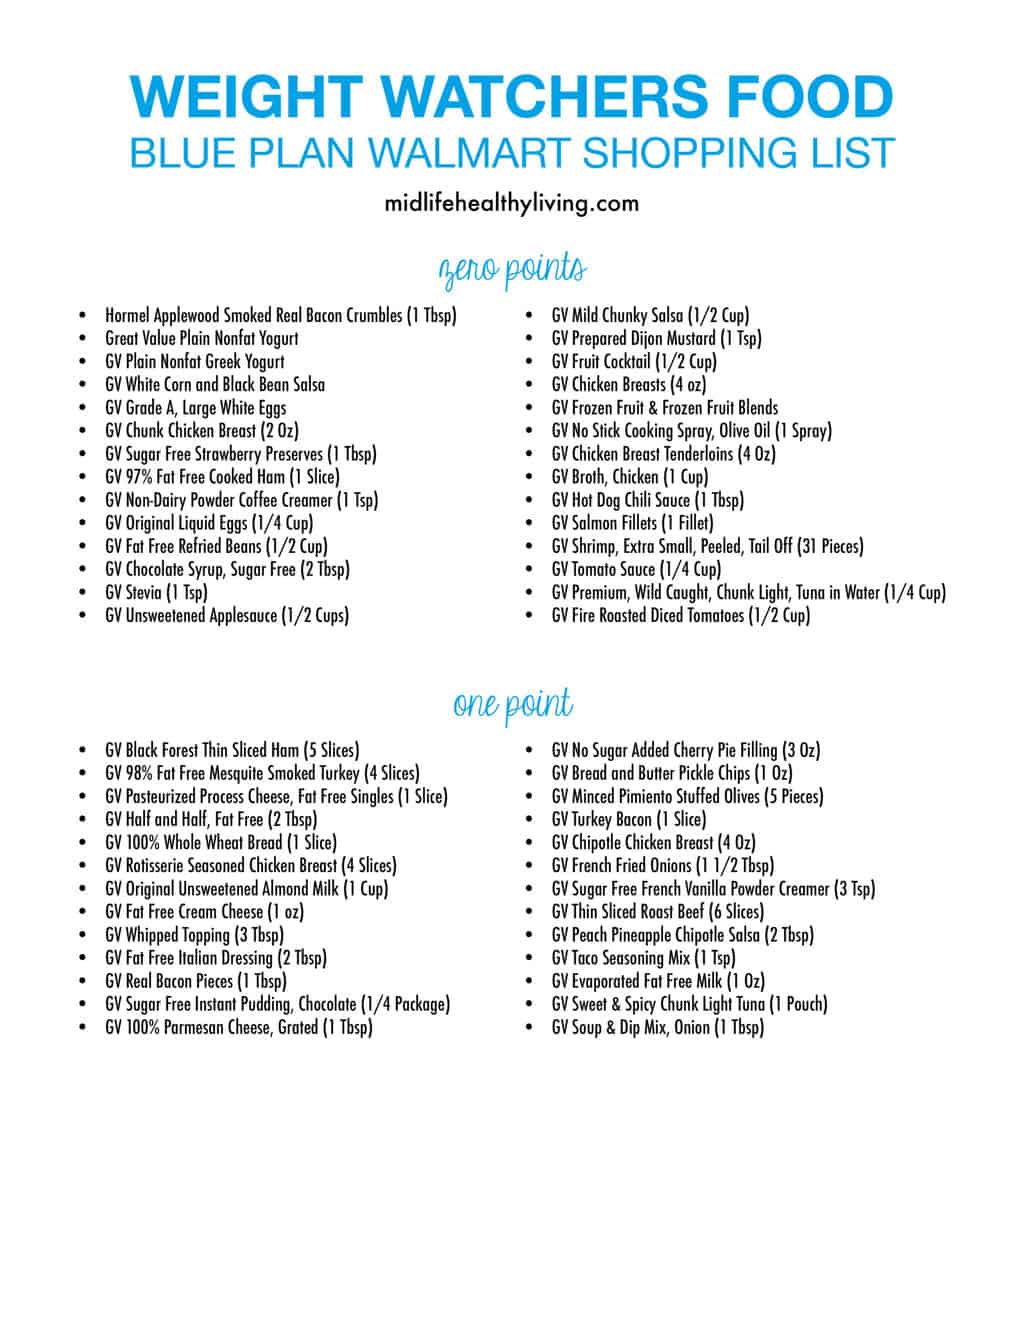 weight watchers food to buy from walmart blue plan